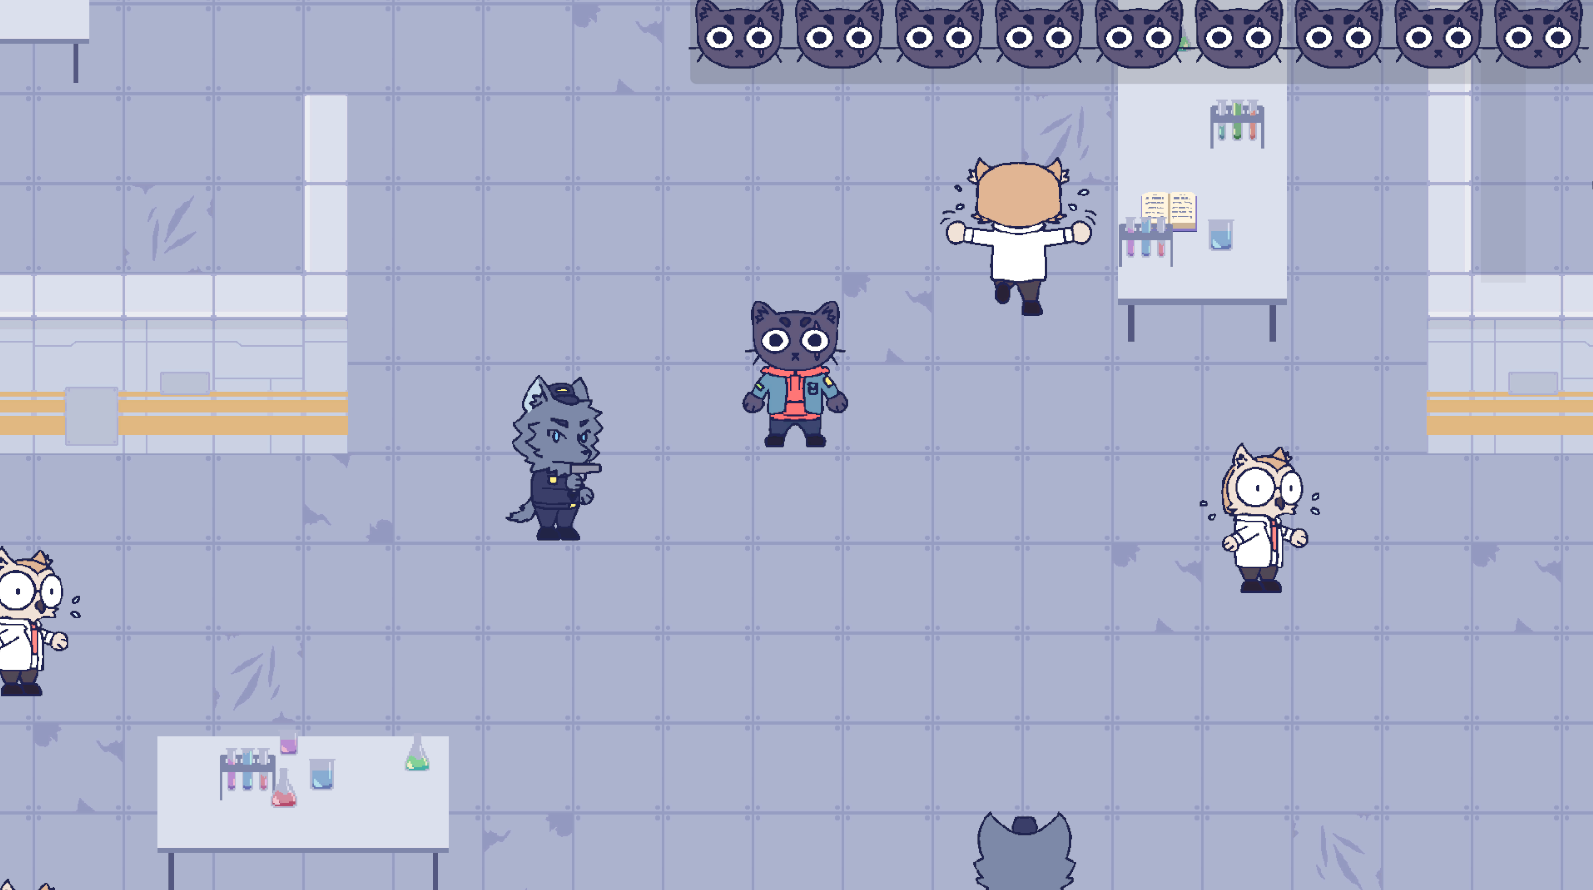 pixel-art cat stood in laboratory with scientists (owls) and armed guards (wolves)